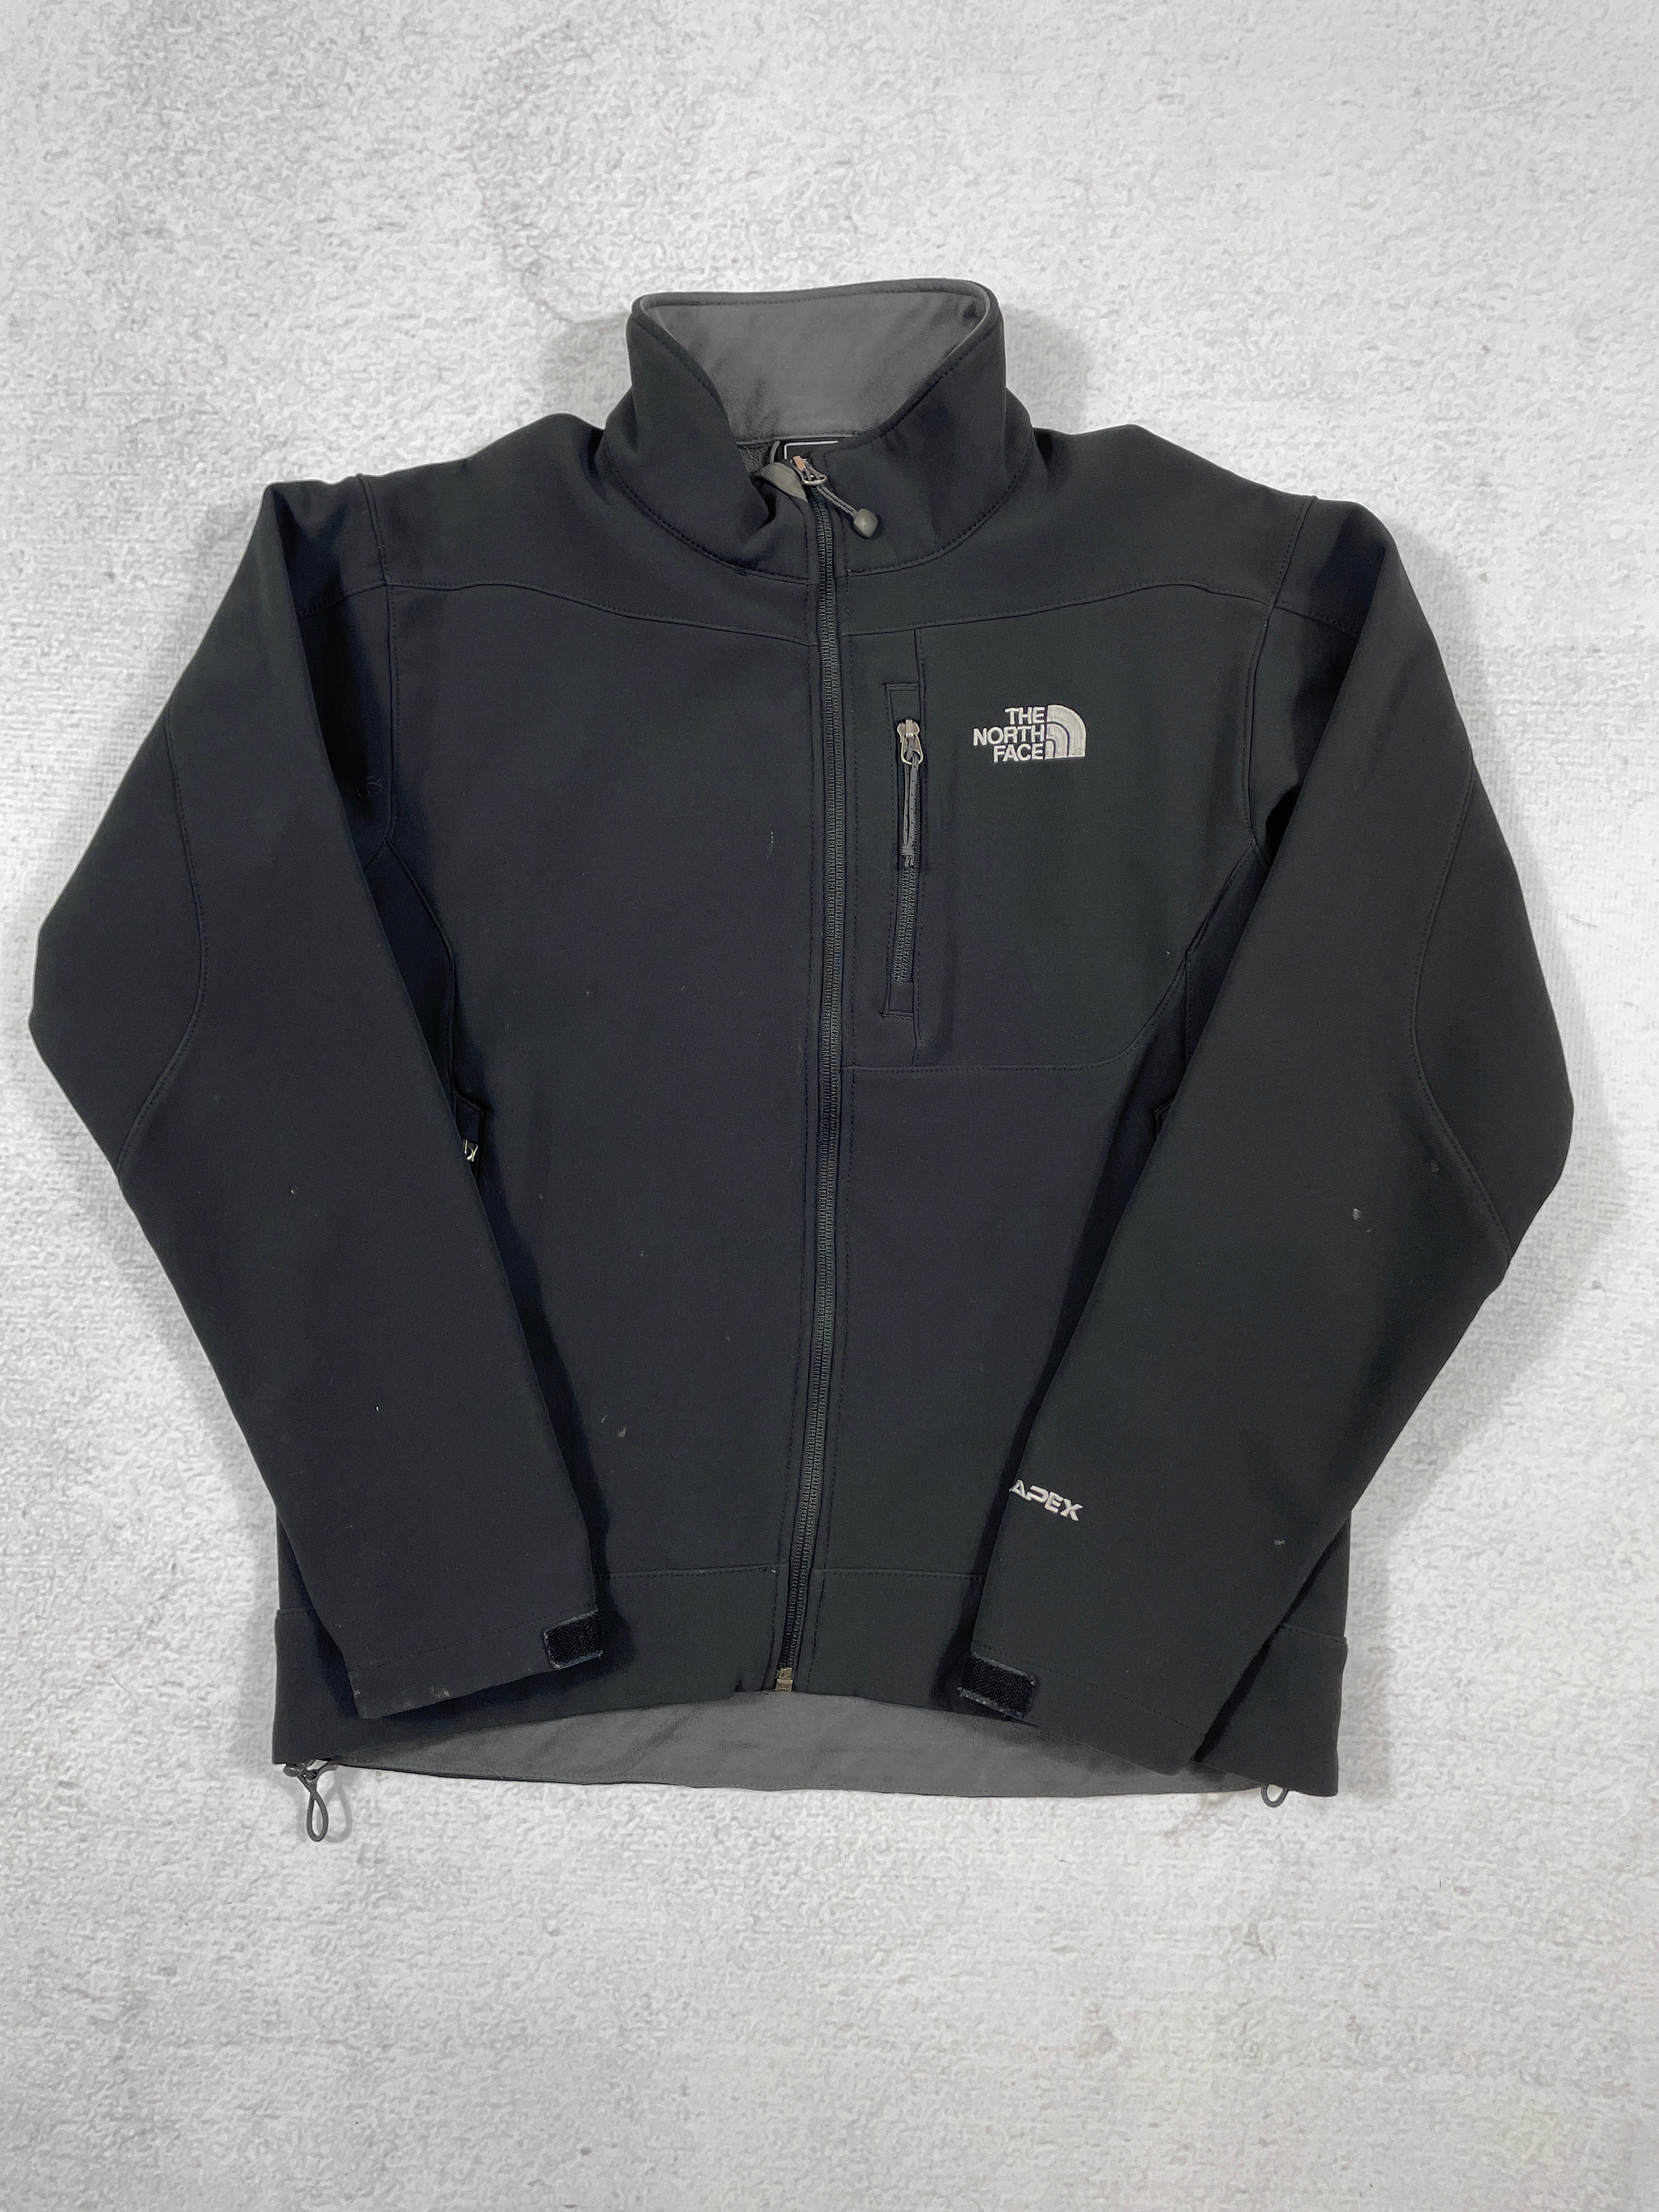 Vintage The North Face Lightweight Jacket - Men's Small